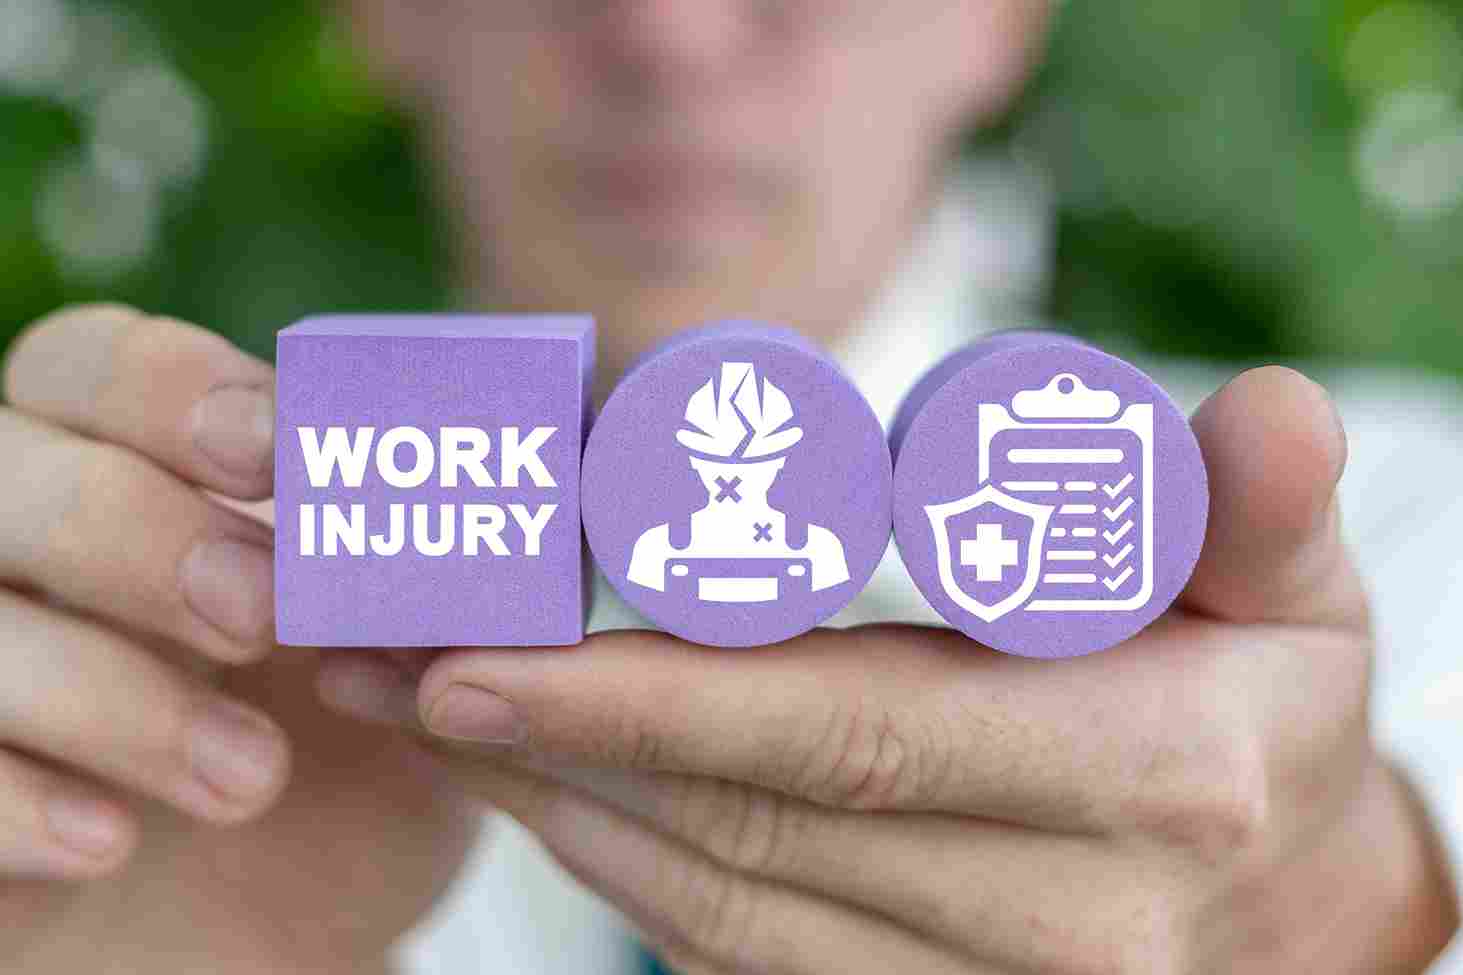 Our Rights to workers Compensation after a West Palm Beach workplace injury